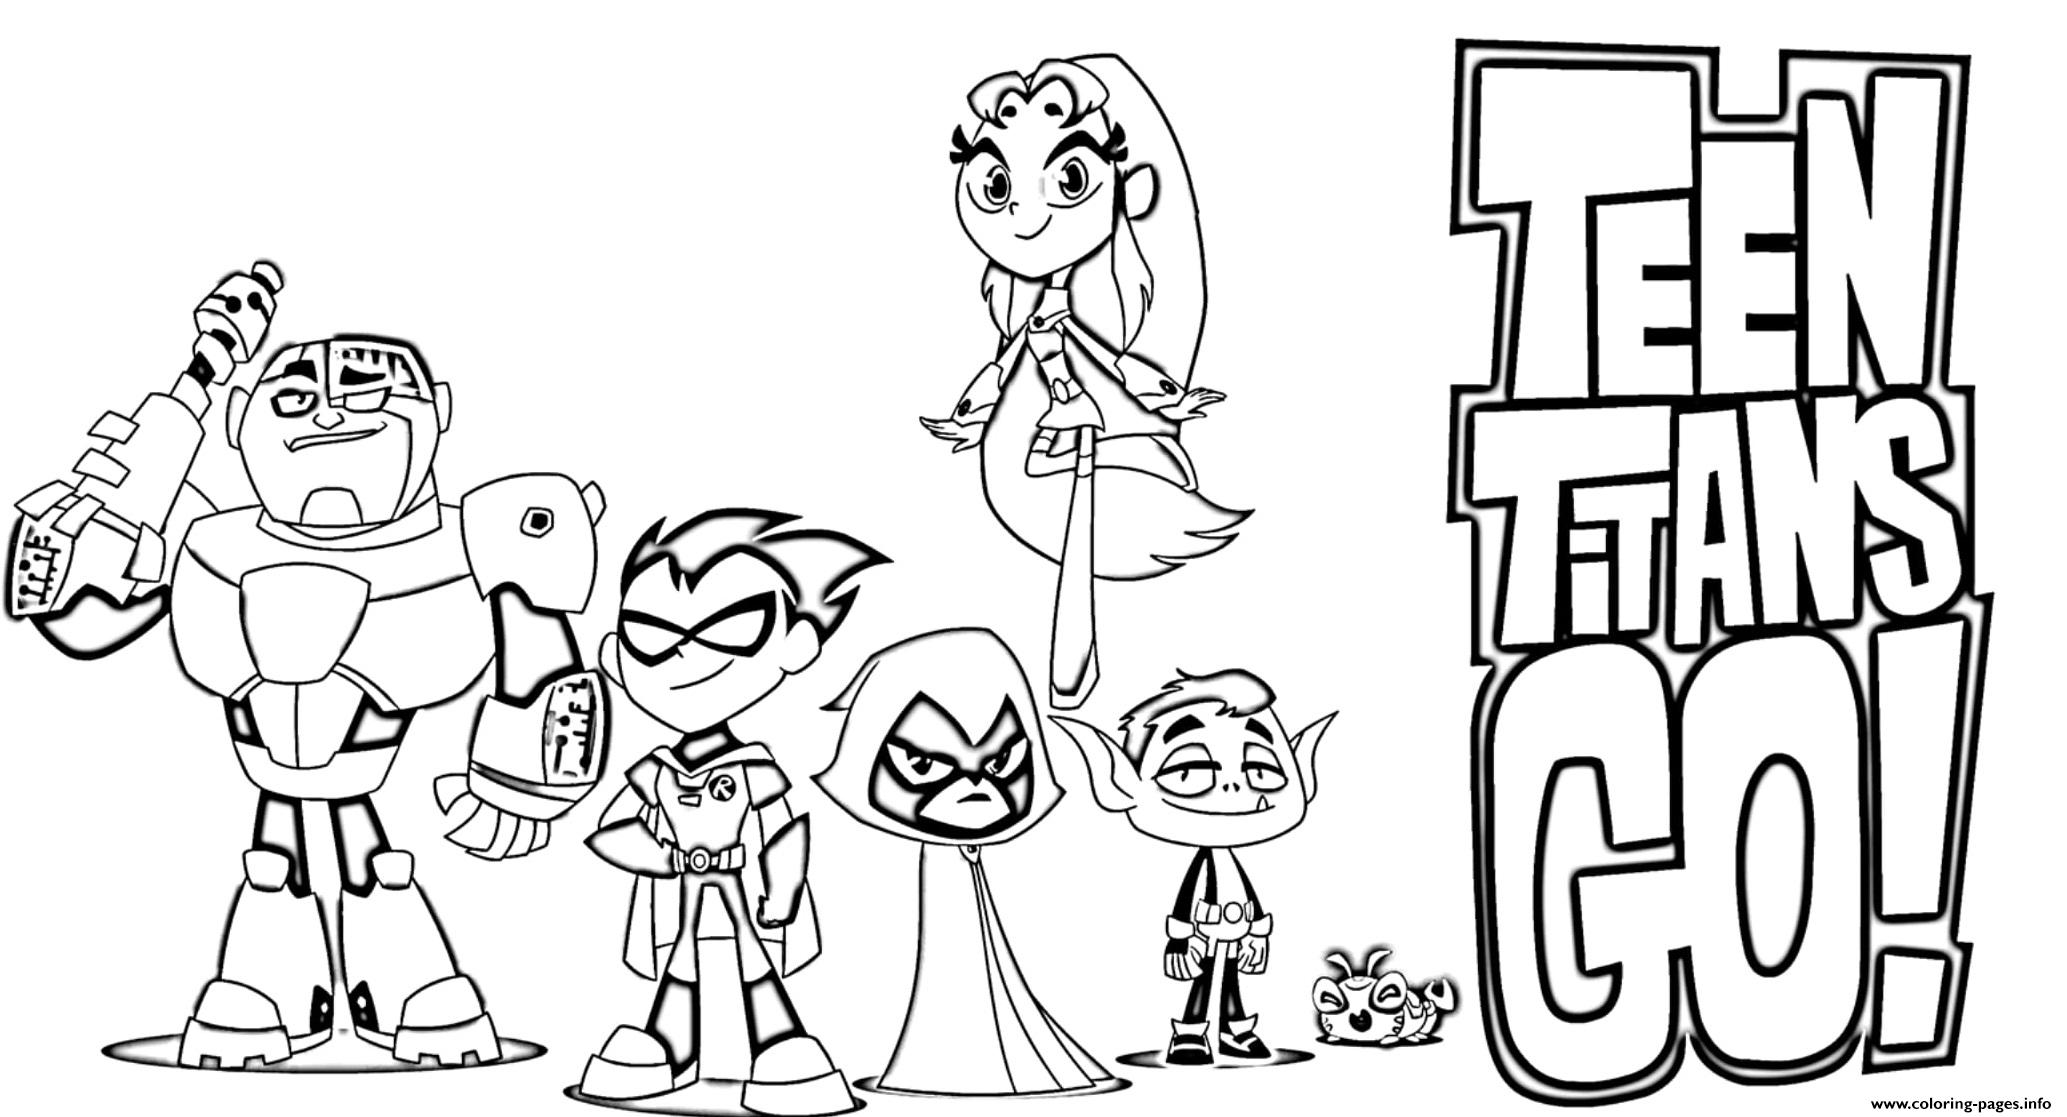 46-great-photos-teen-titans-free-coloring-pages-15-free-printable